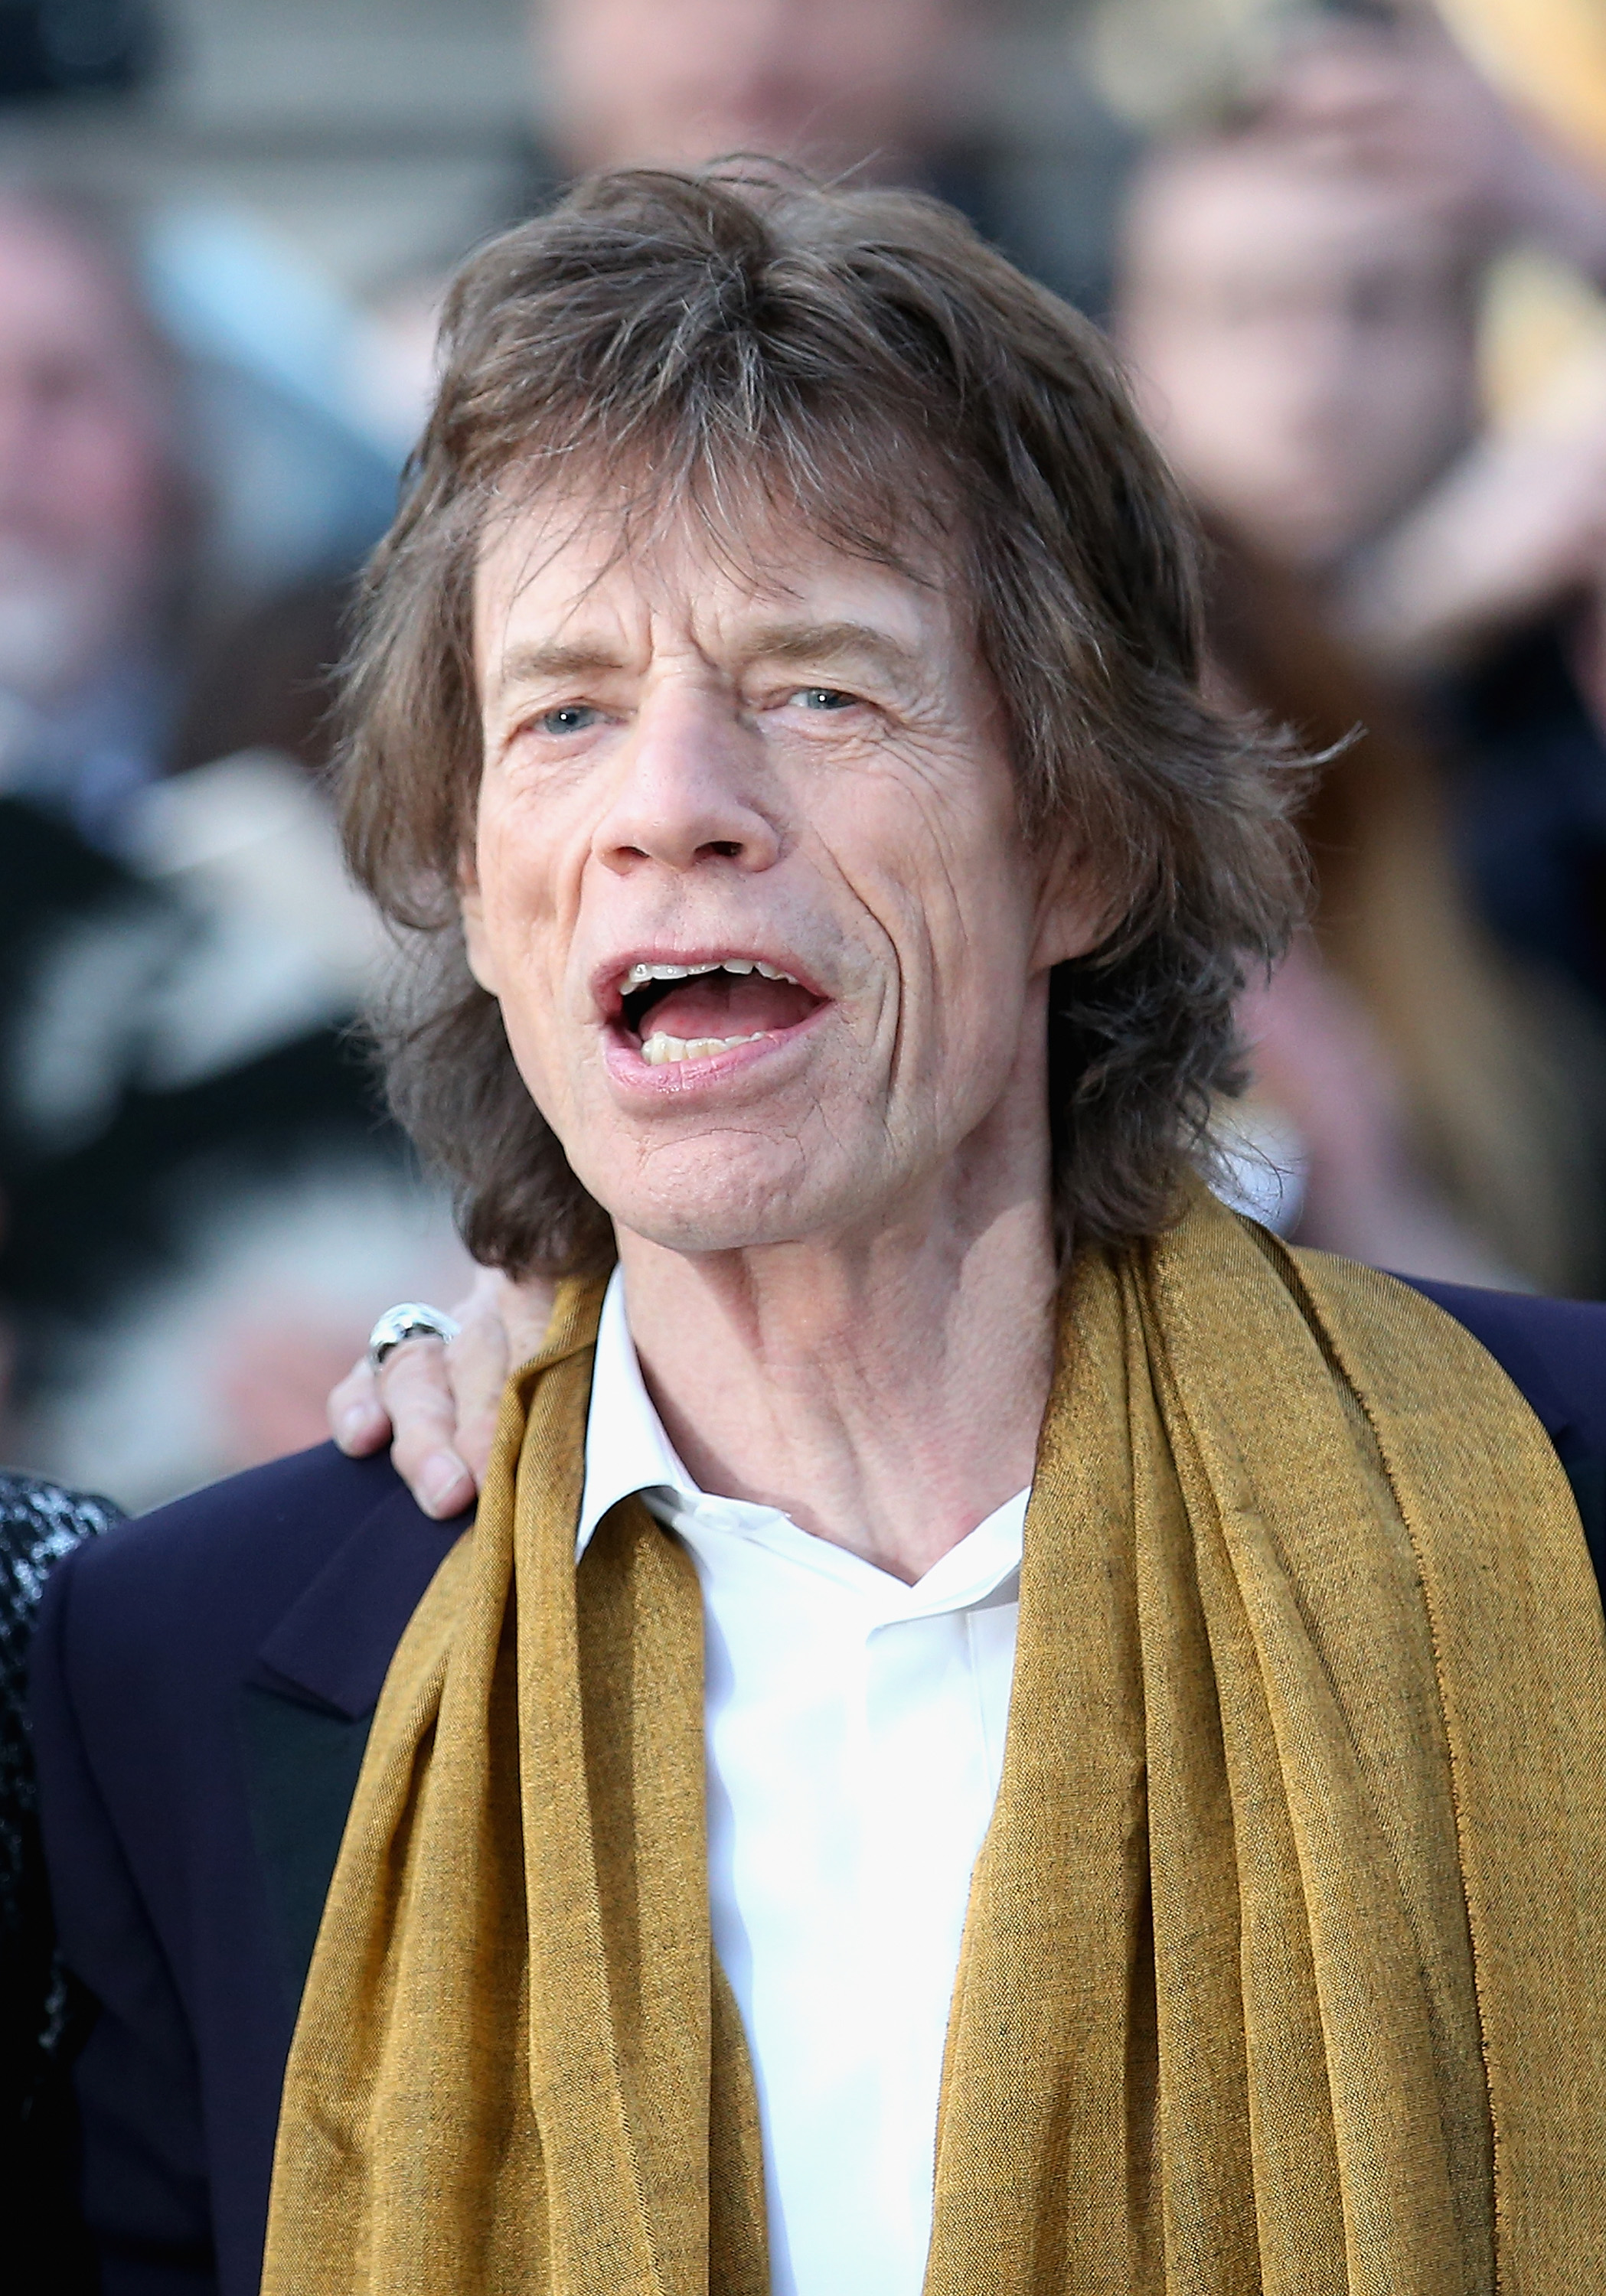 Rolling Stones singer Mick Jagger to father for 8th time